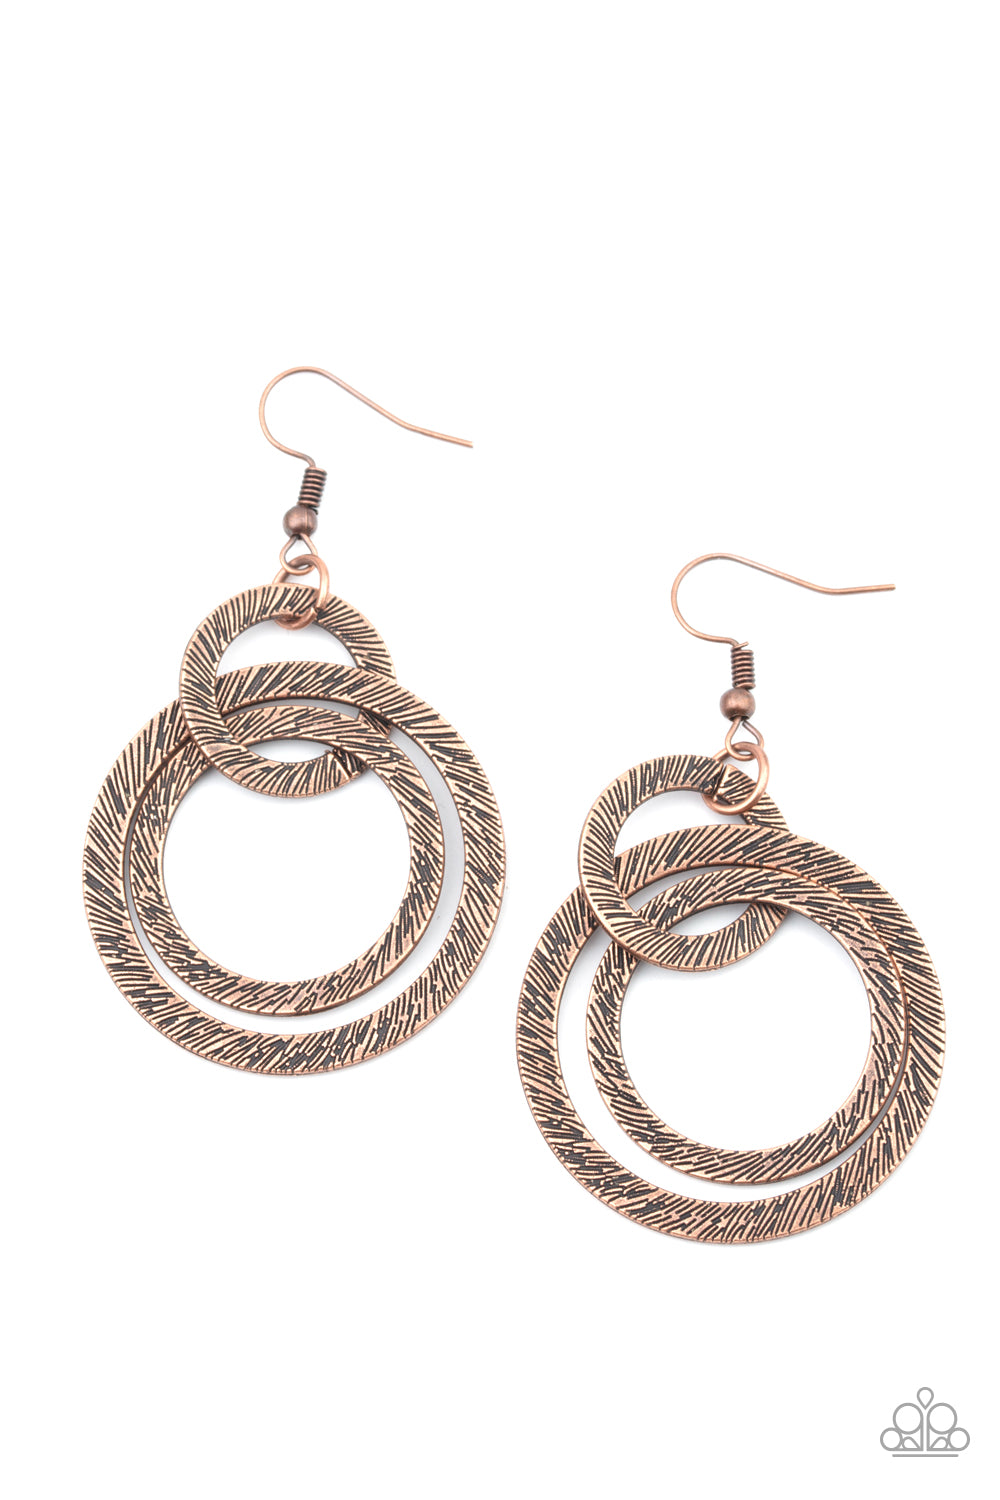 Distractingly Dizzy - Copper Earrings - Princess Glam Shop